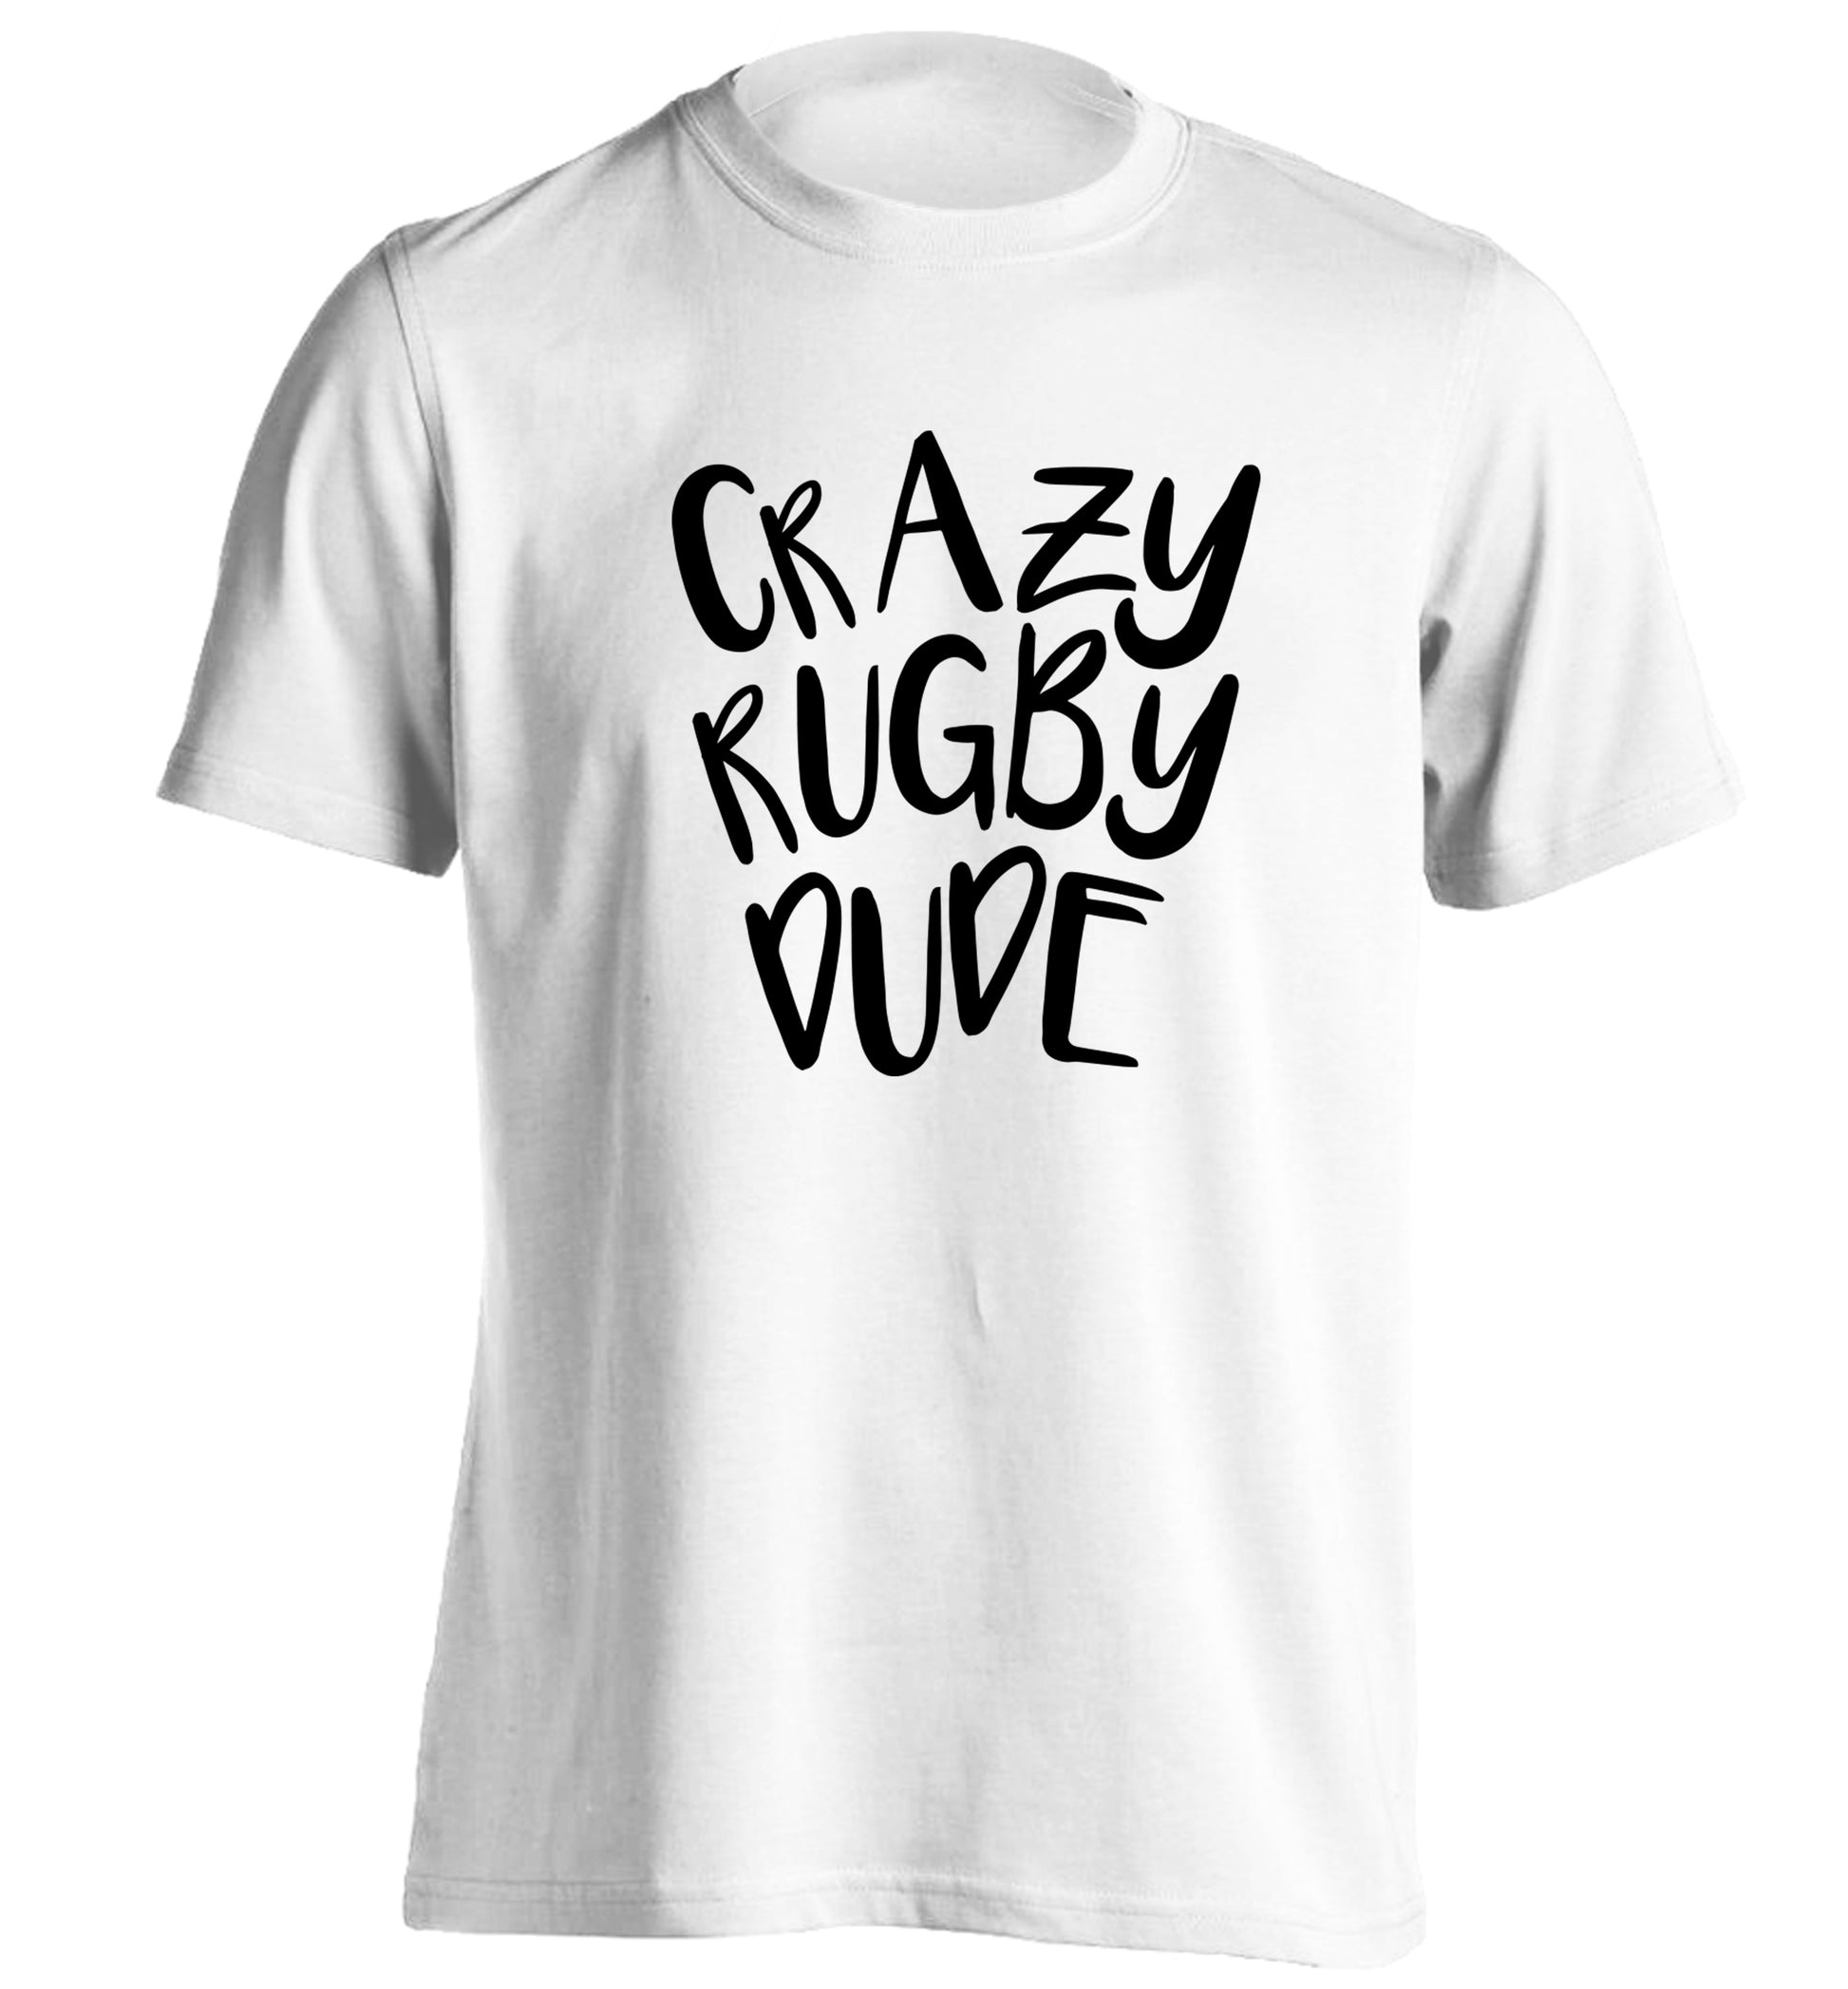 Crazy rugby dude adults unisex white Tshirt 2XL